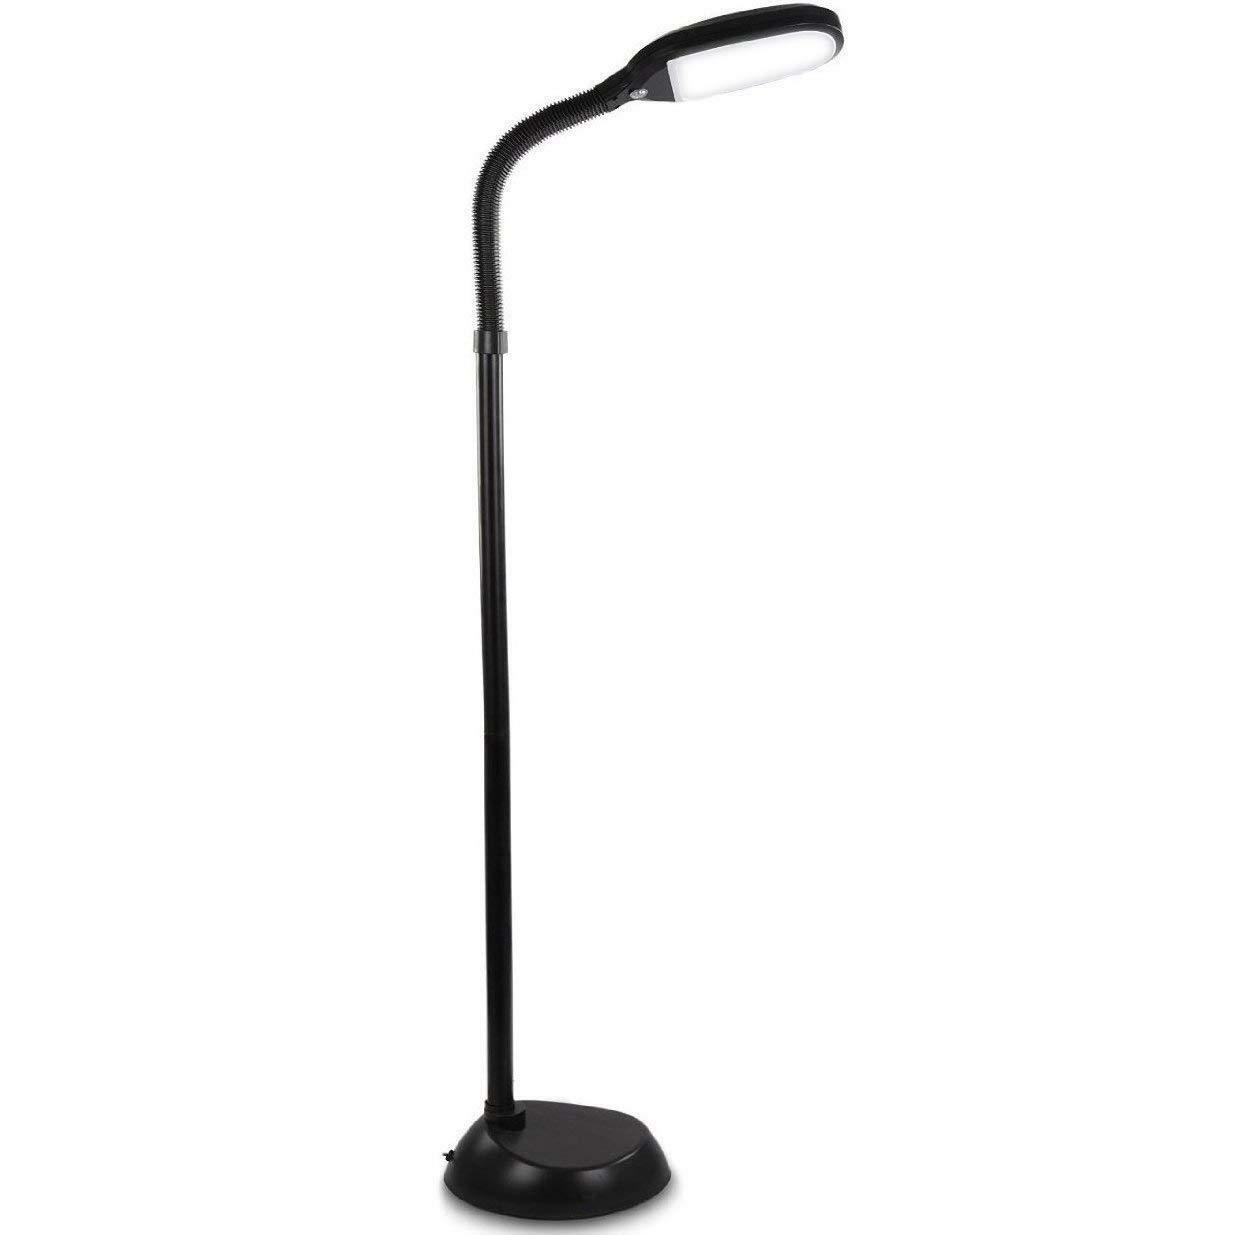 Brightech Litespan Led Reading Floor Lamp Dimmable Full Spectrum Light in proportions 1235 X 1235